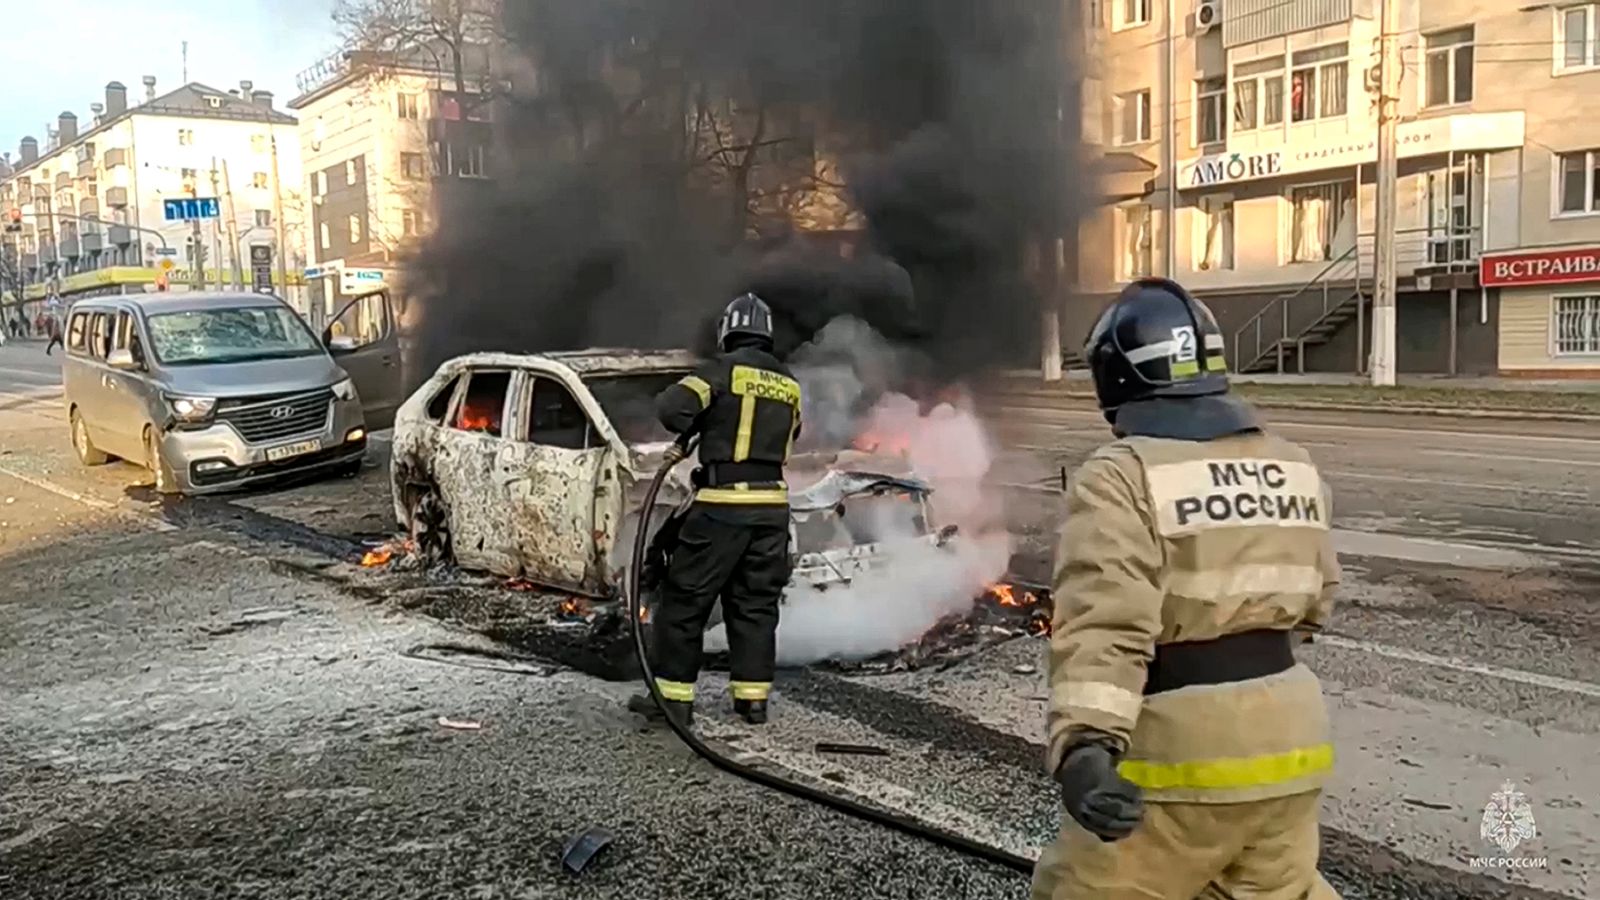 Ukrainian bombing kills 14 Russian civilians, officials say, a day after Russia launched its biggest airstrike of the war